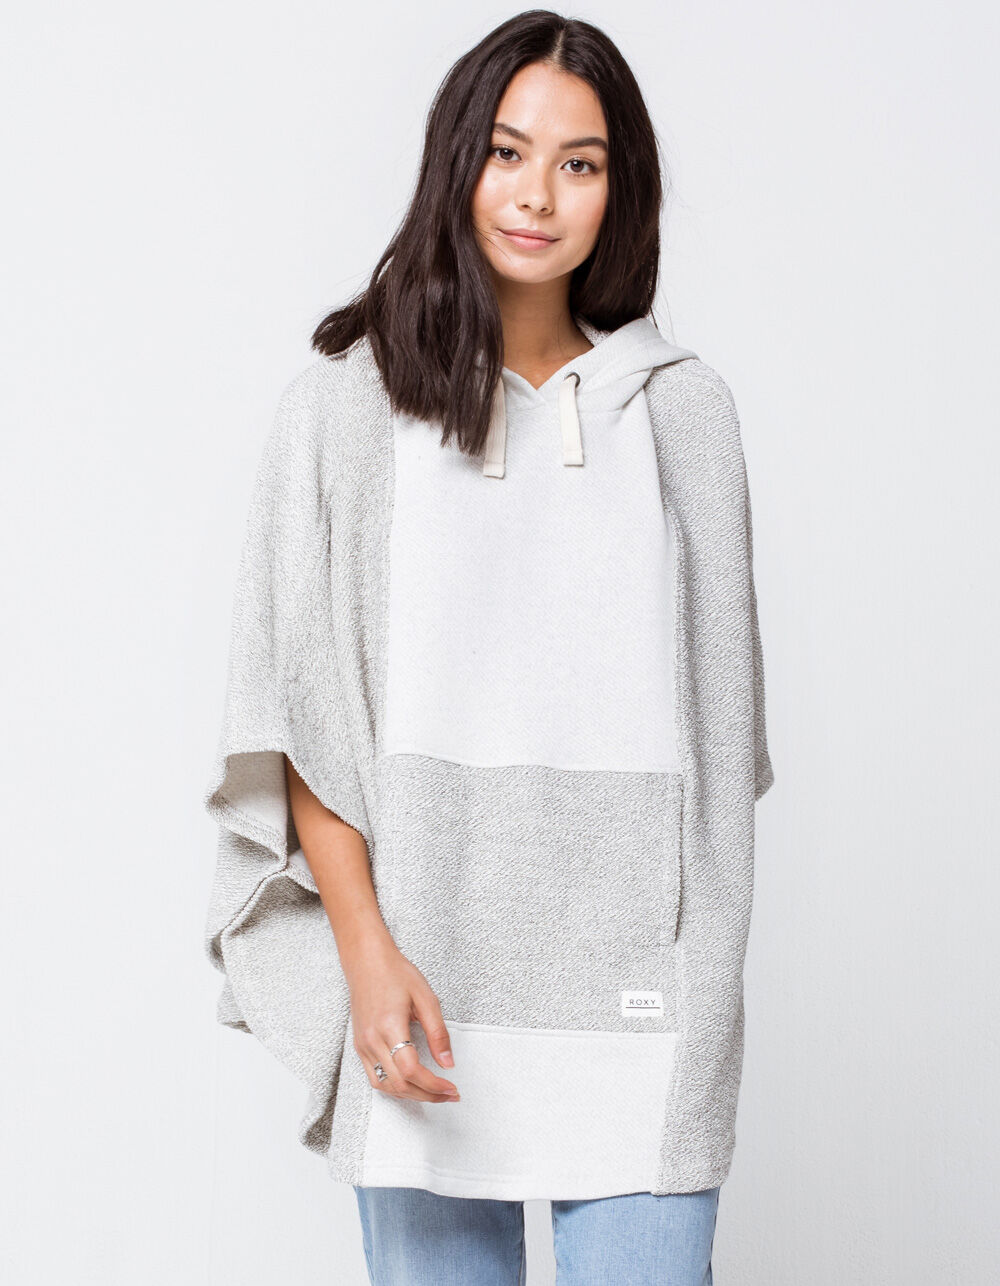 ROXY Summer Surf Oversized Womens Poncho - GRAY COMBO | Tillys